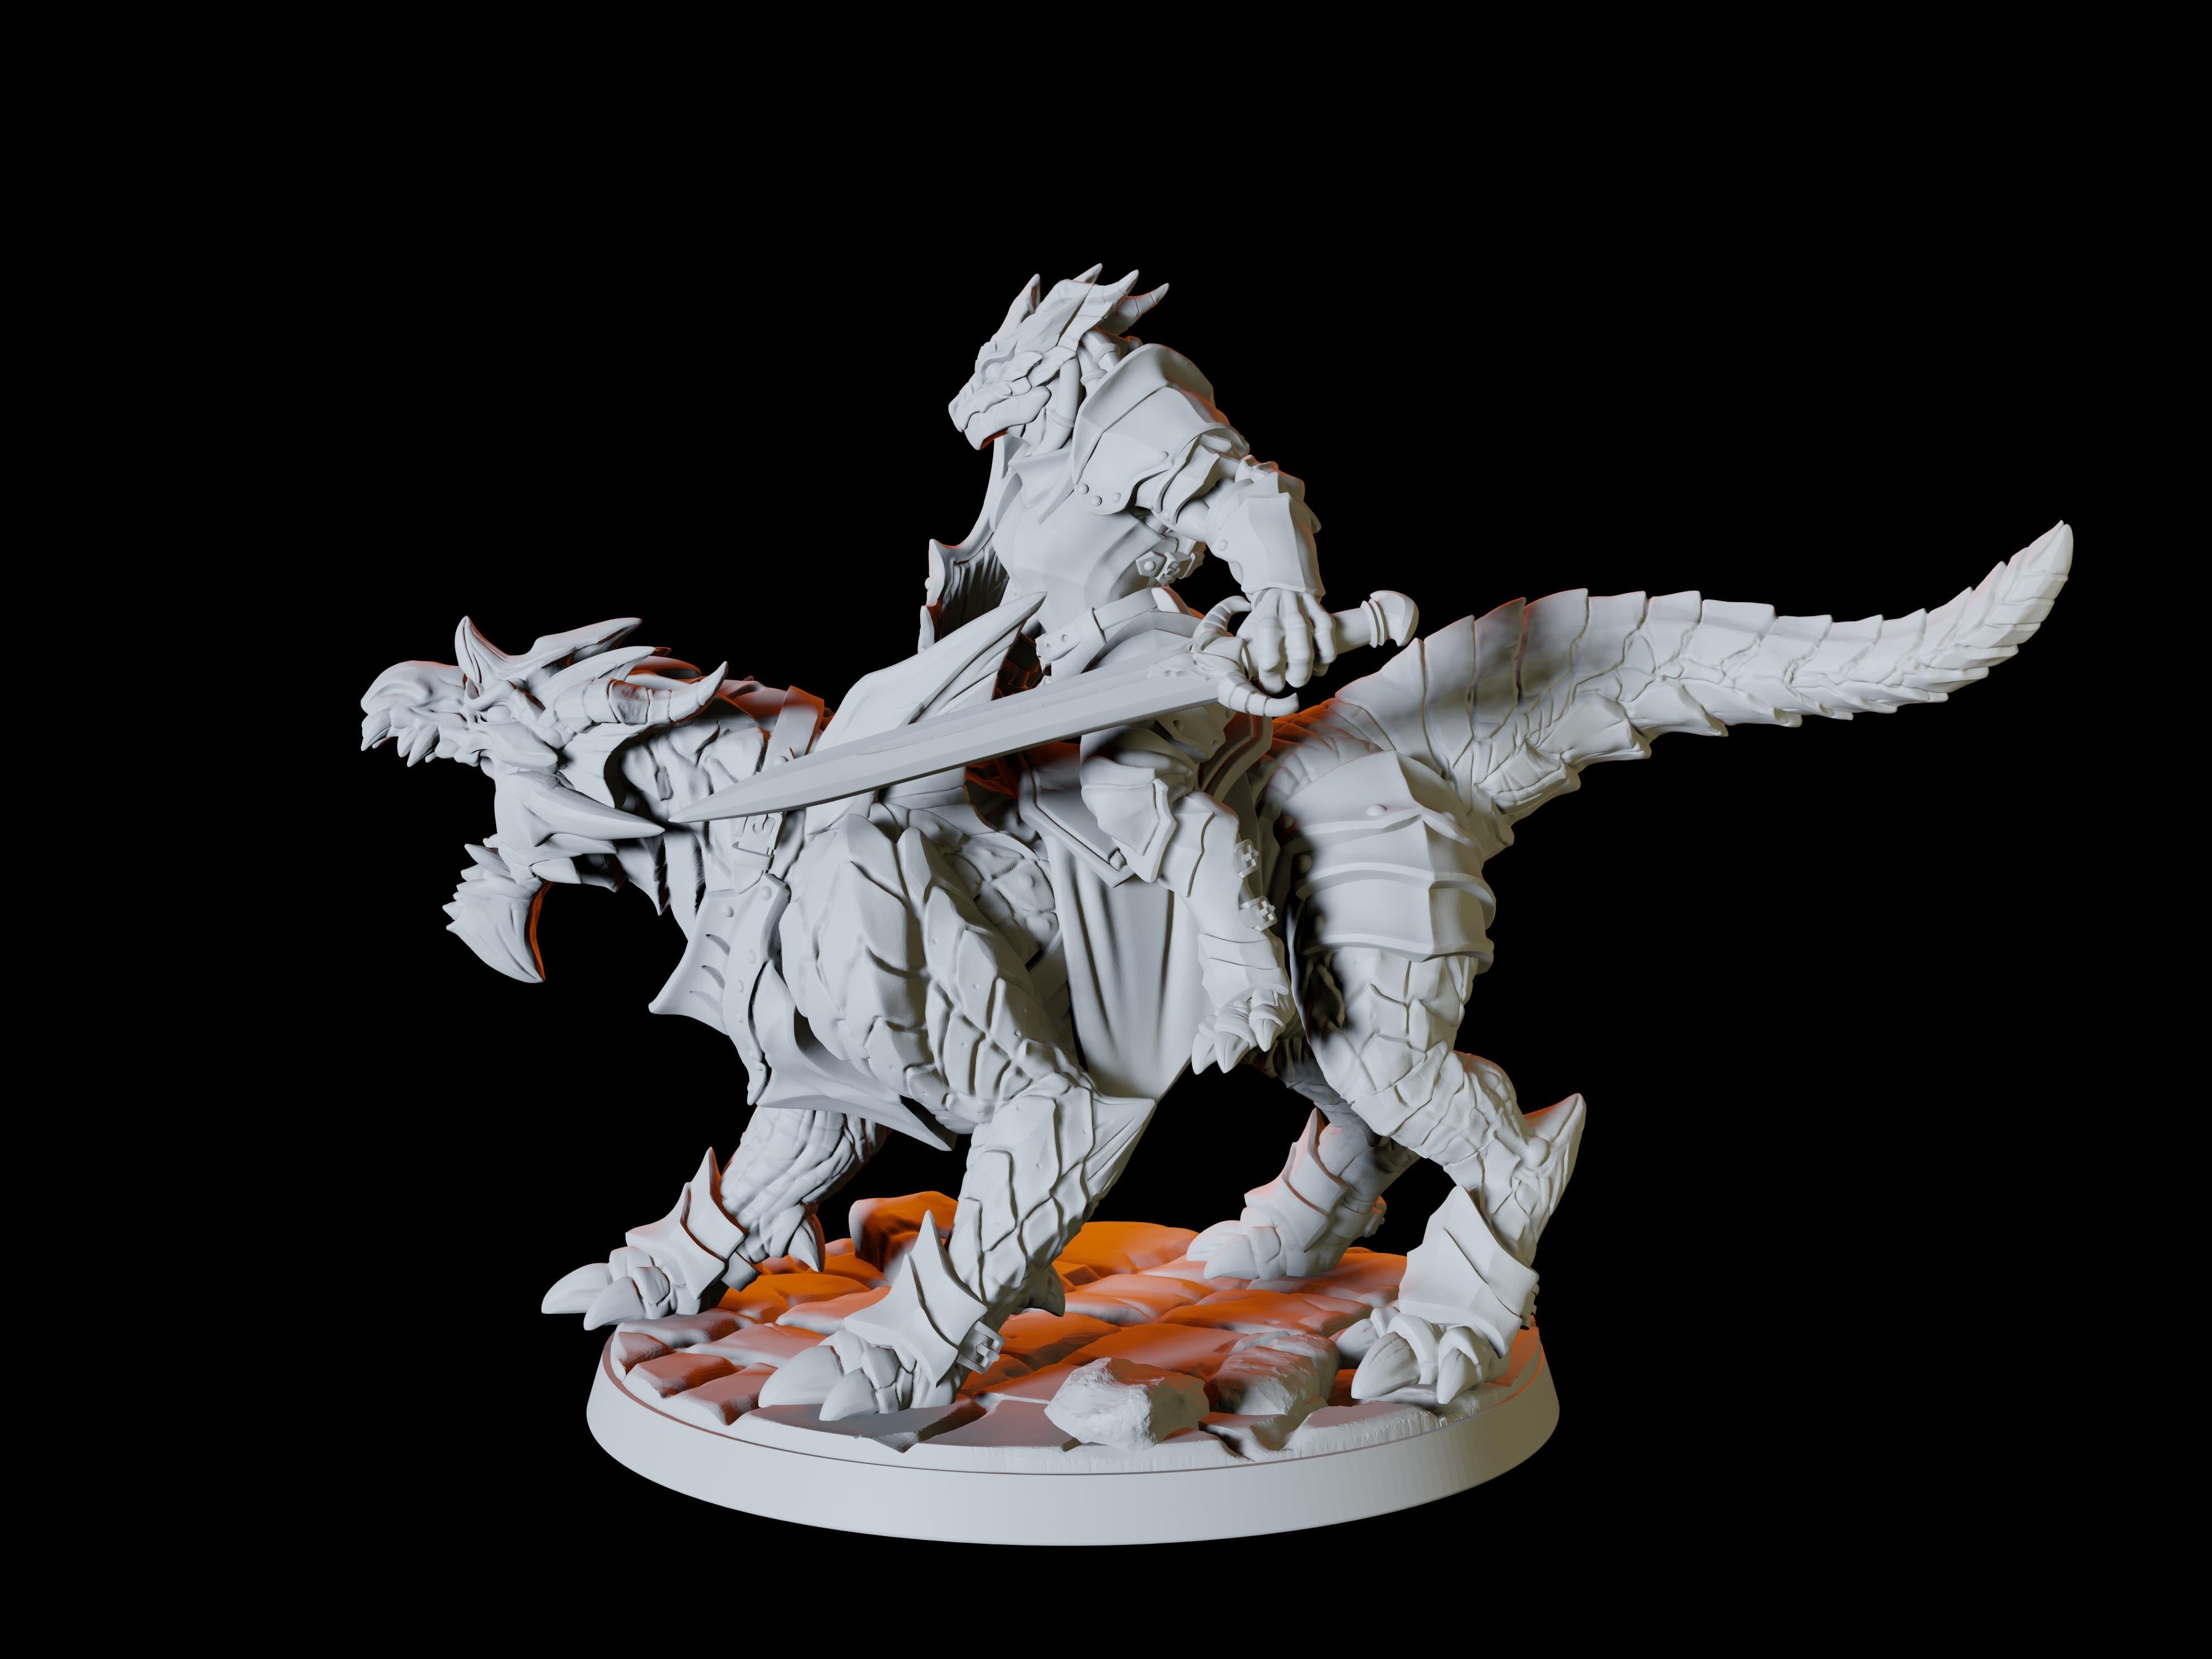 Three Dragonborn Rider Miniatures for Dungeons and Dragons - Myth Forged